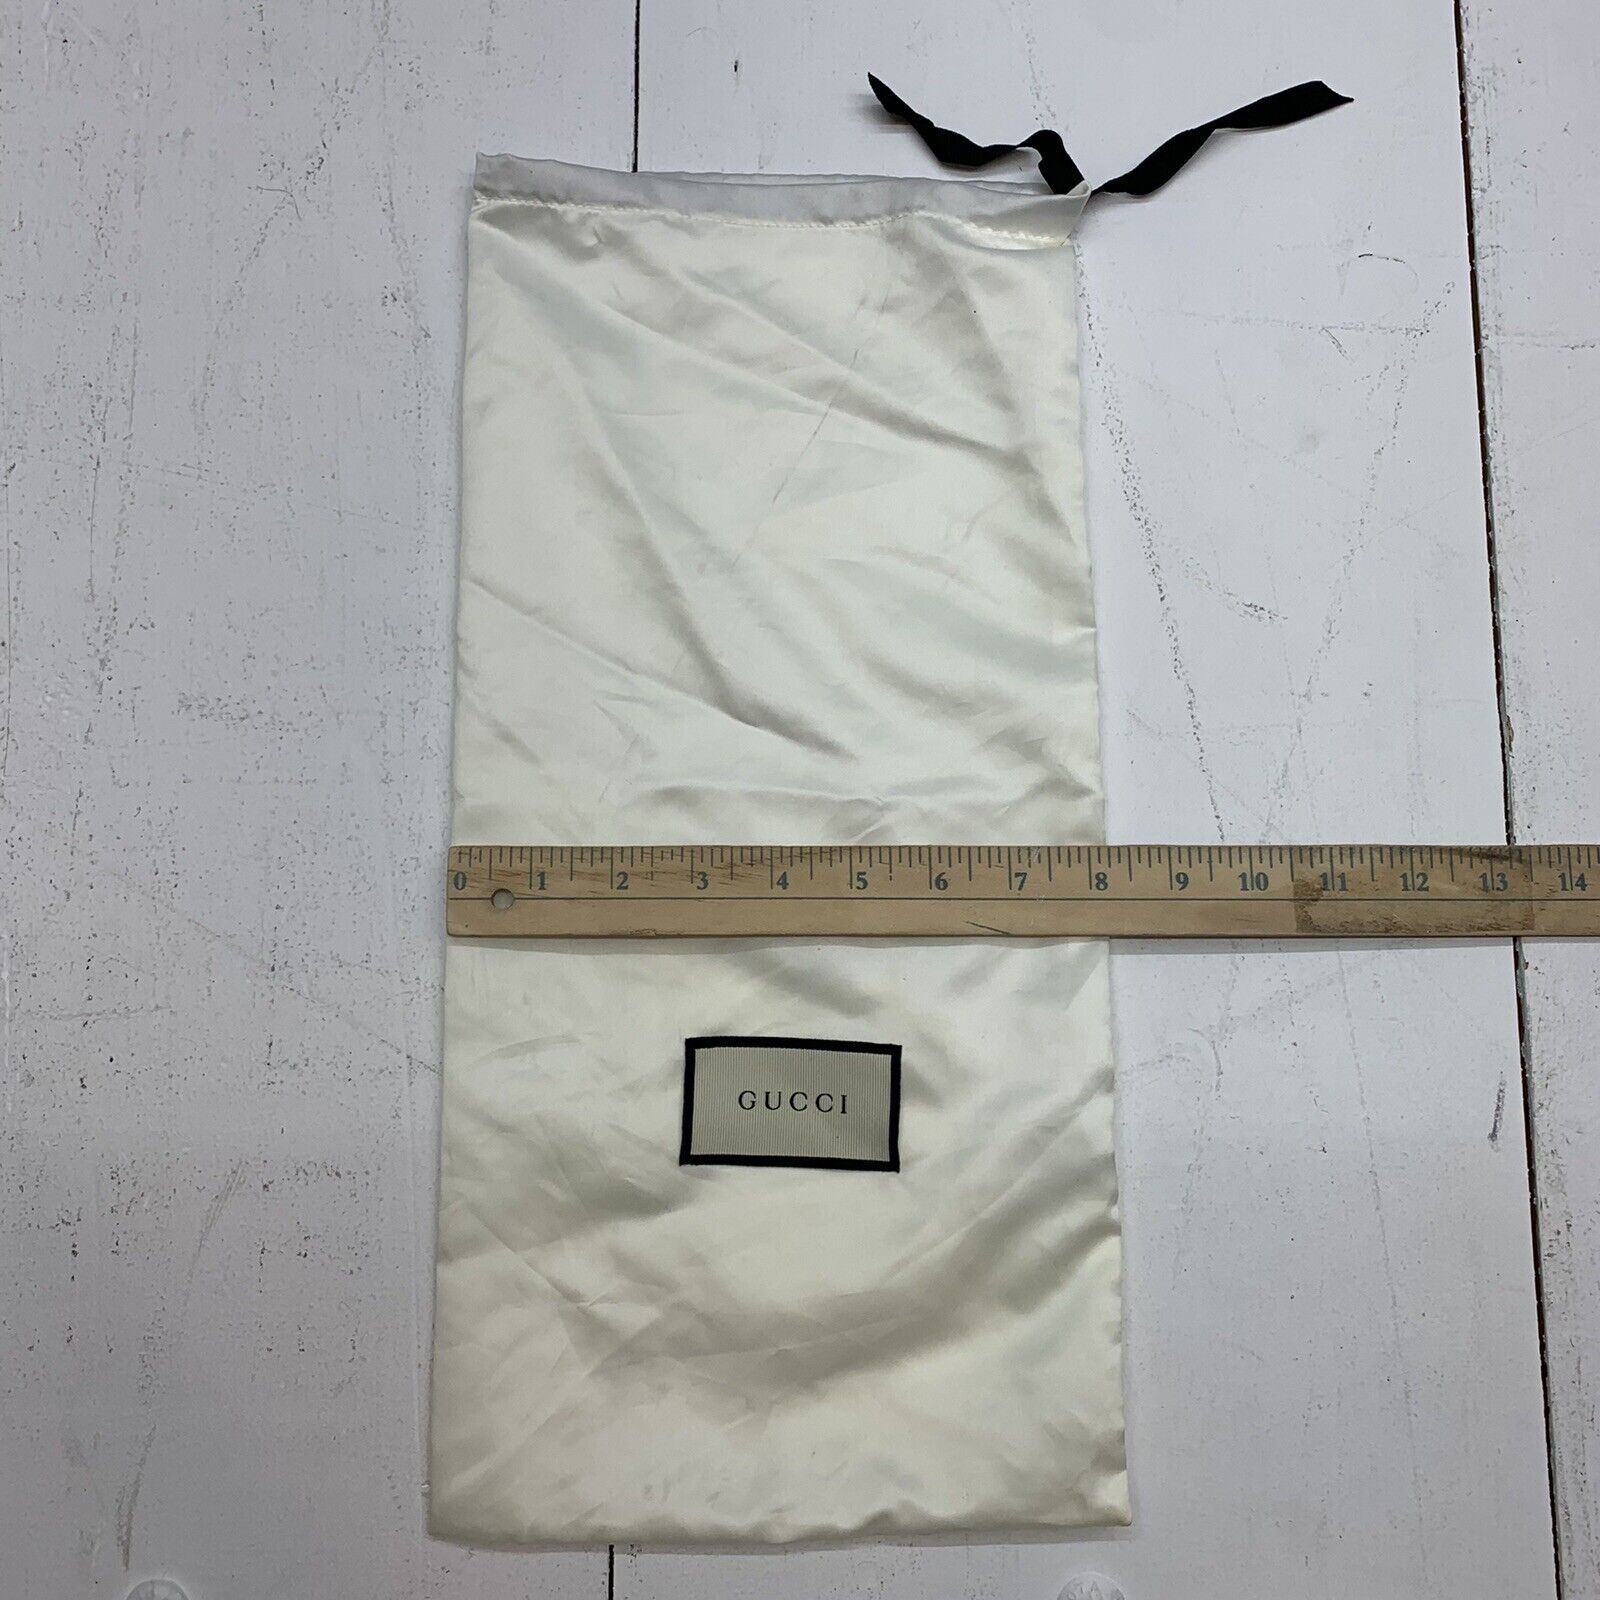 Gucci Dust Bag Cover Drawstring Storage Travel Bags 11.5” x 11.5” Inches